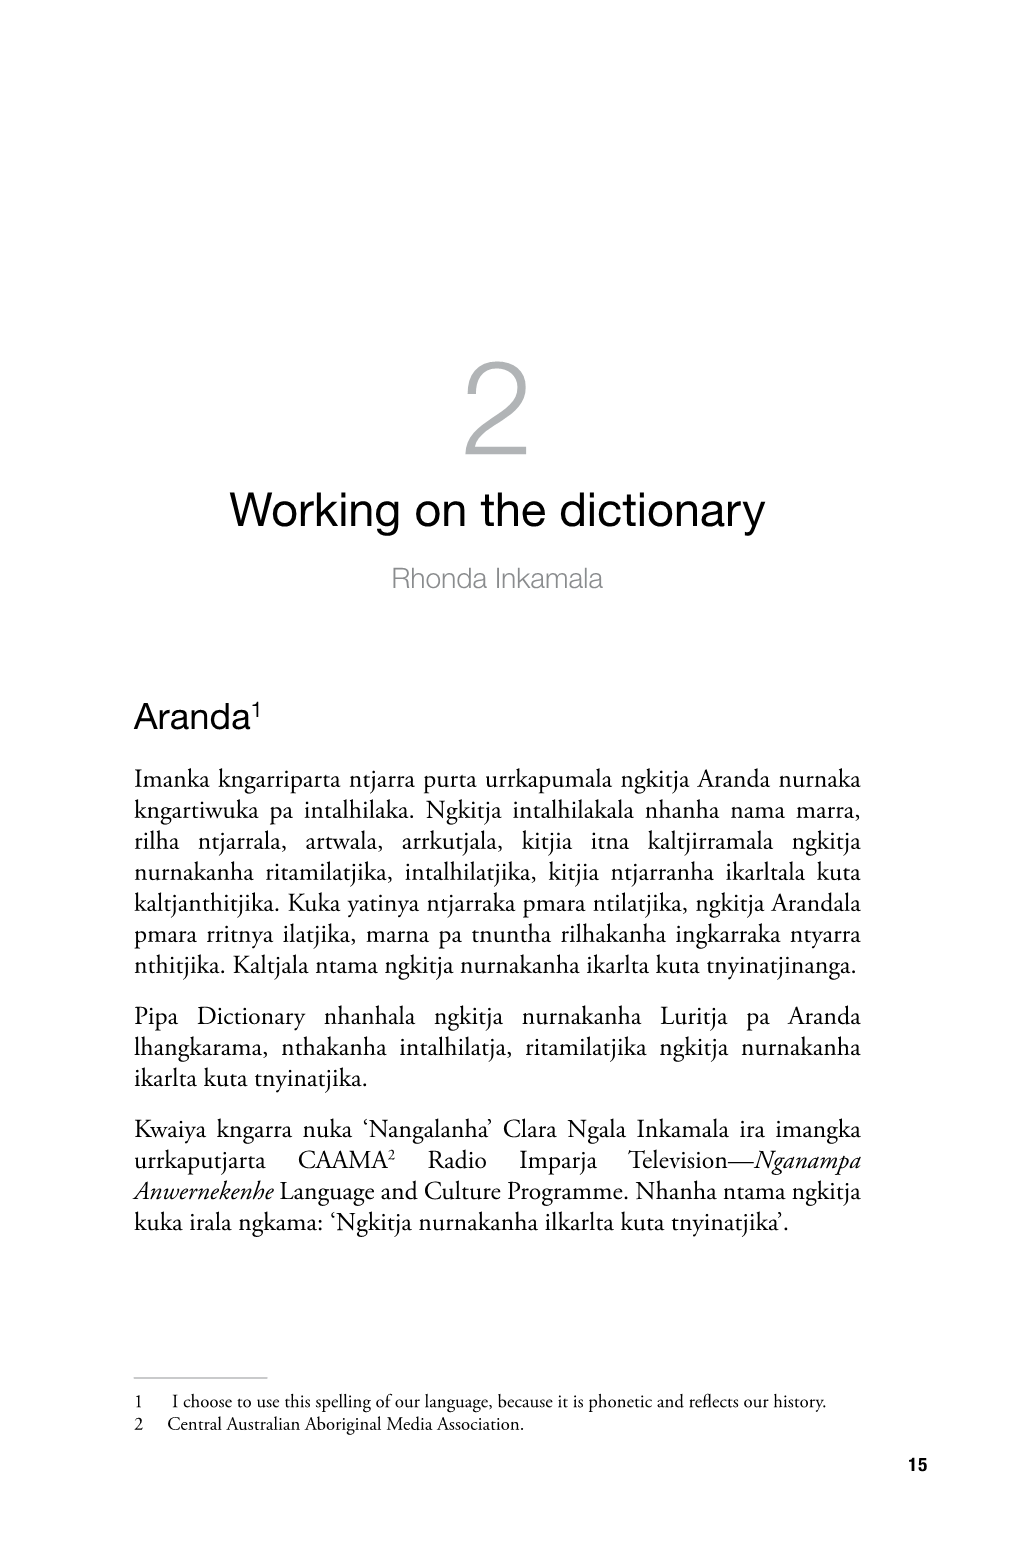 2. Working on the Dictionary